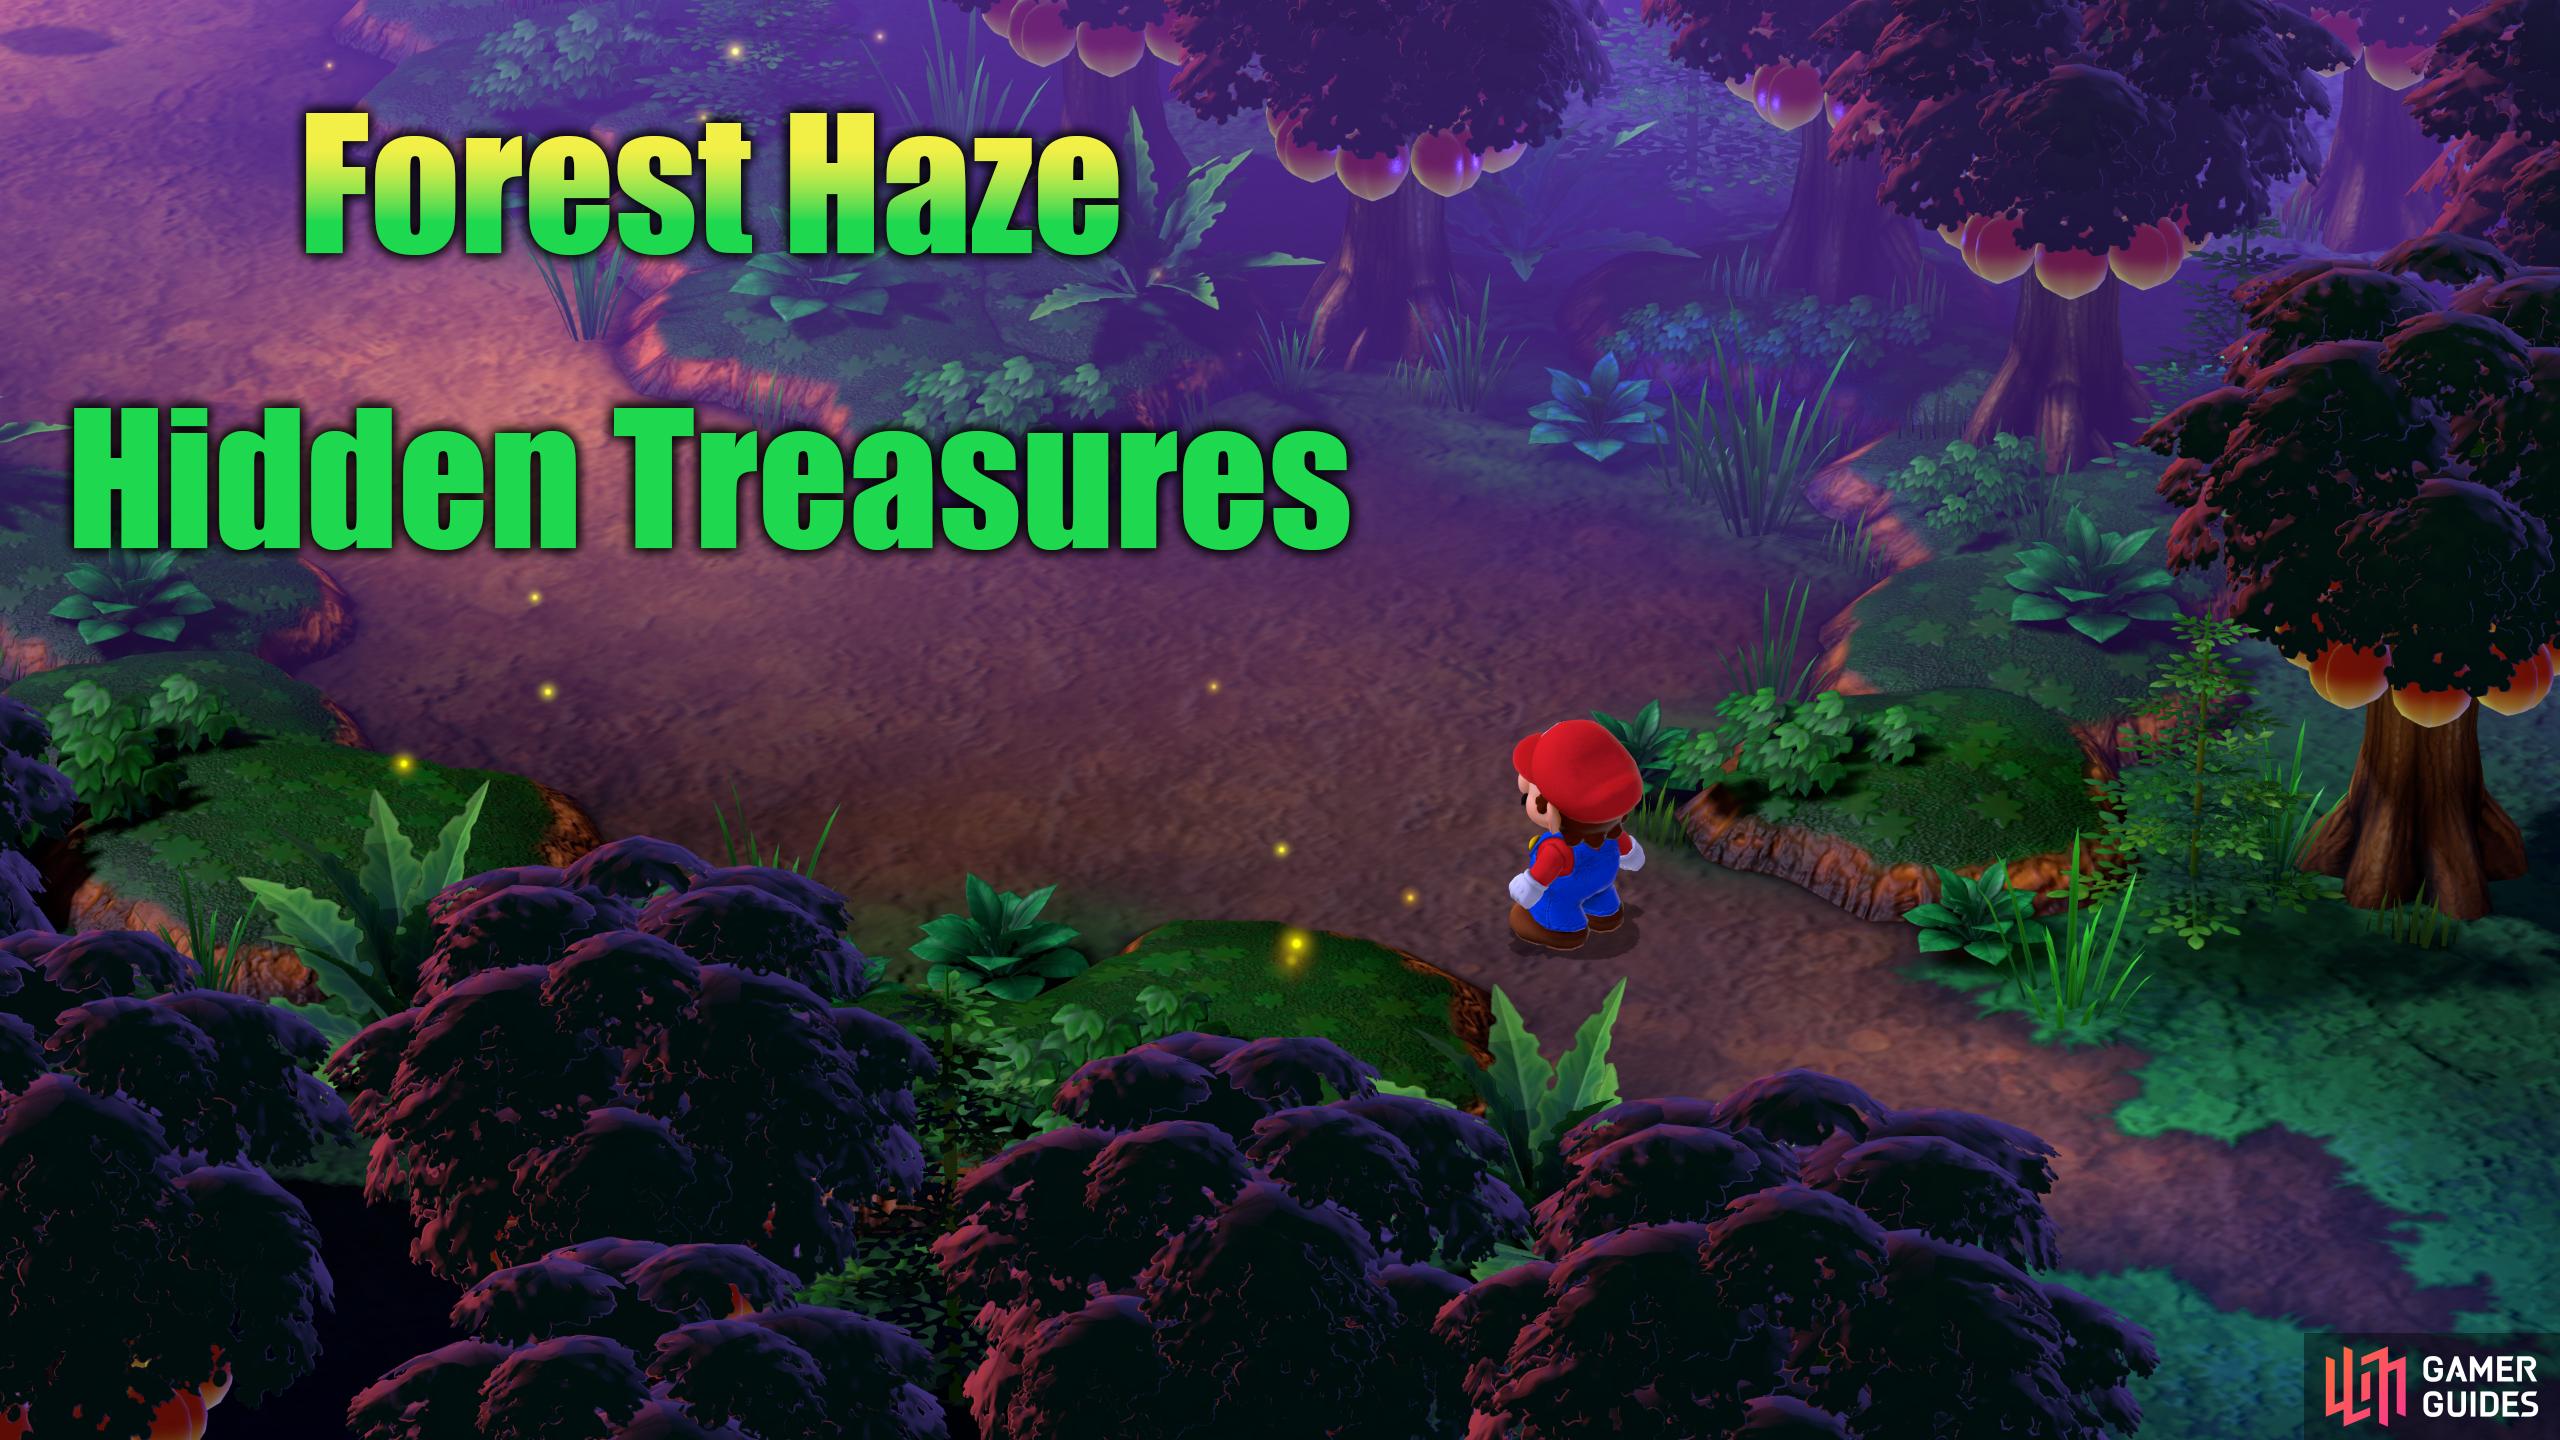 There are six hidden treasures in the Forest Haze zone.